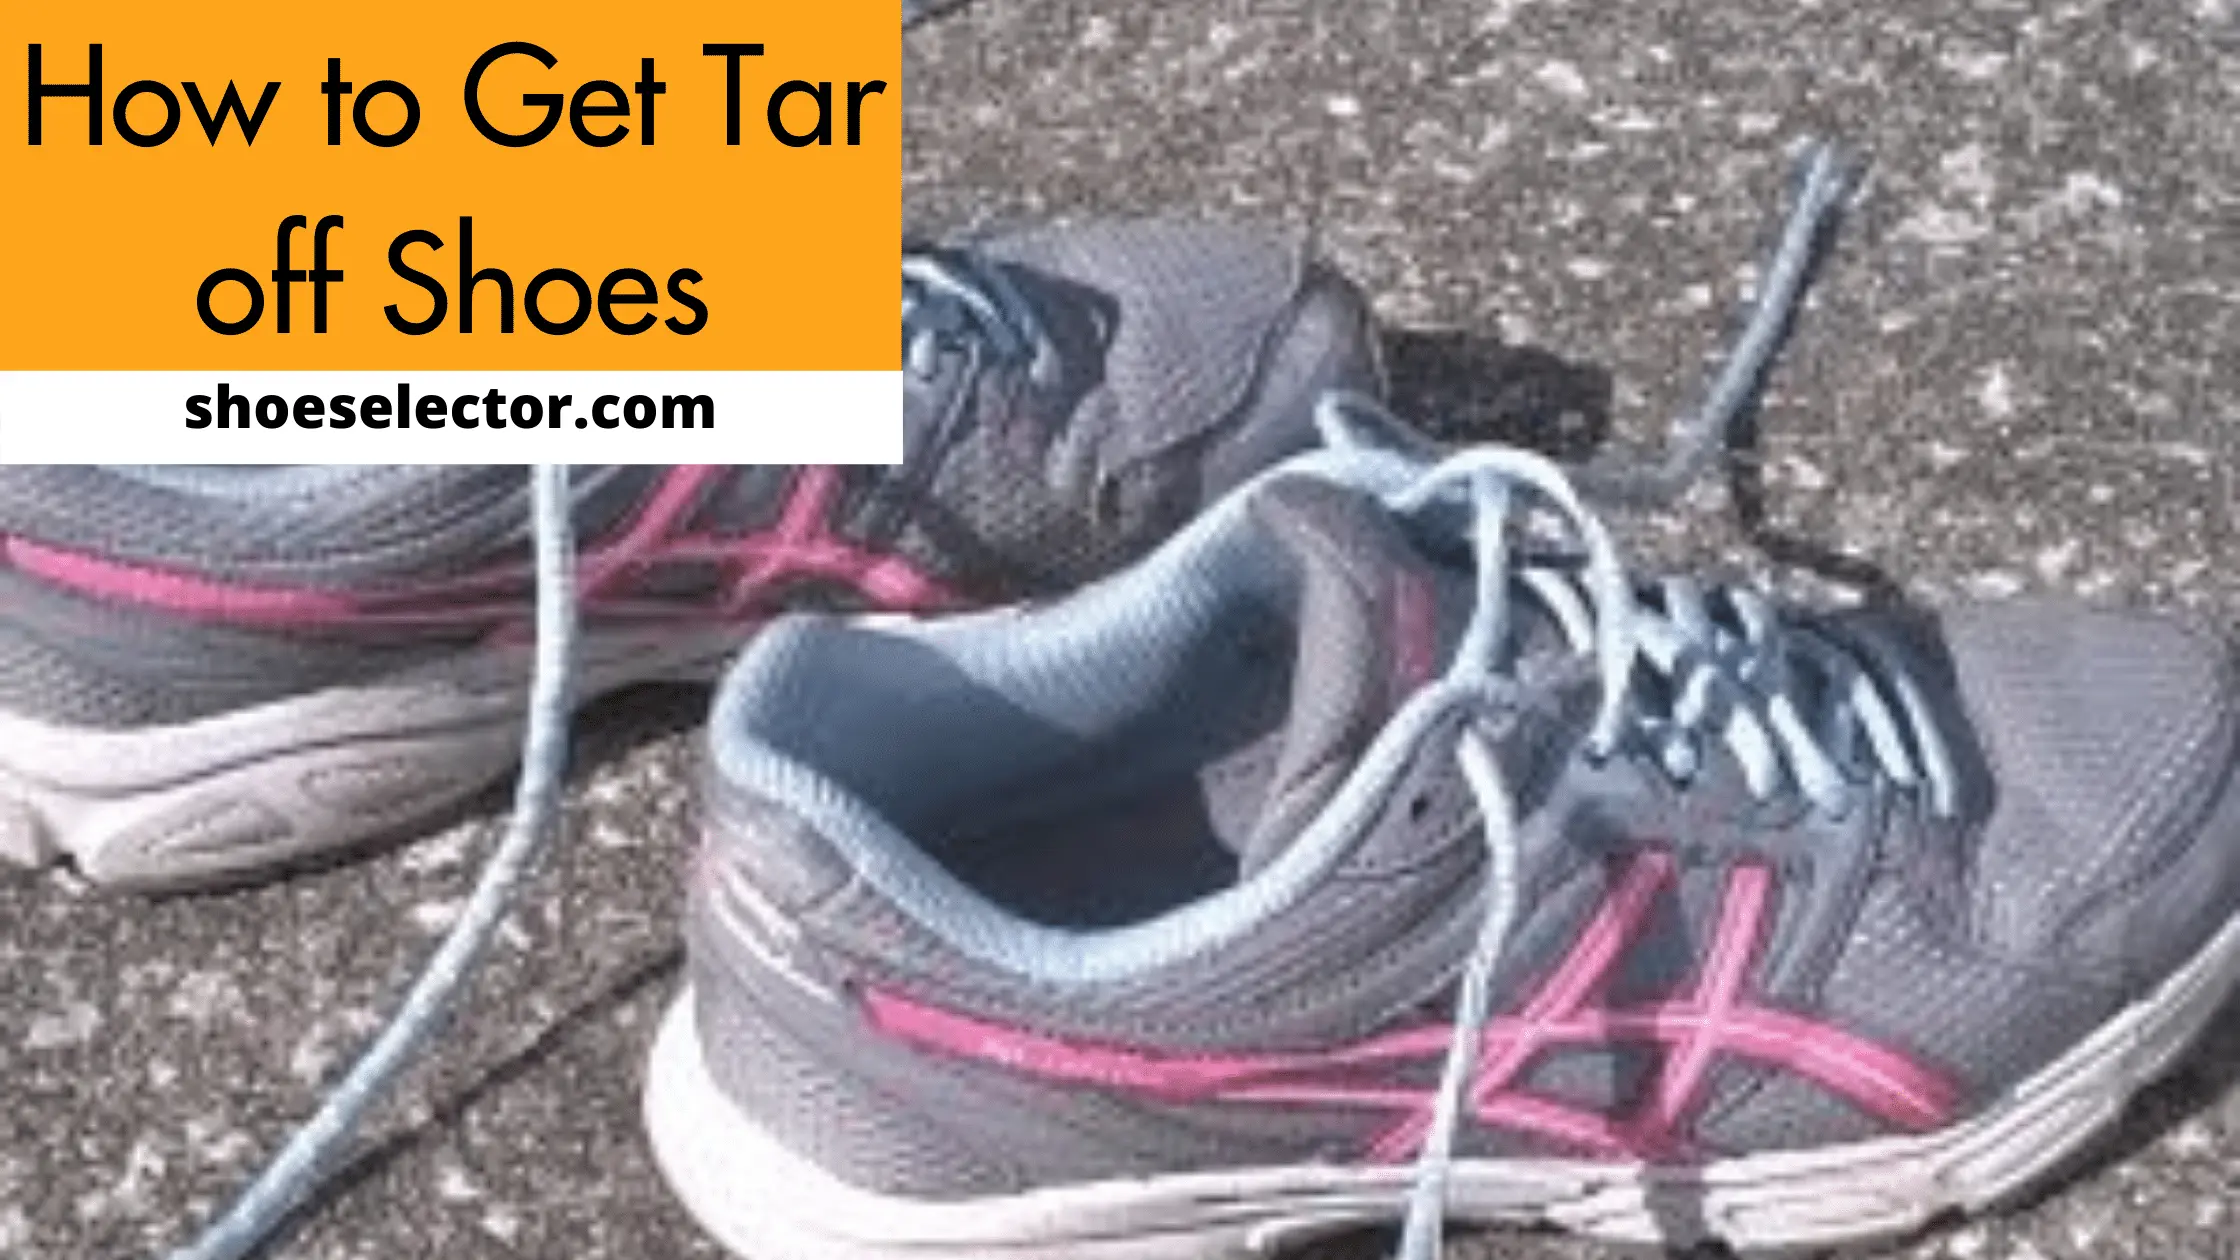 How to Get Tar off Shoes? - Complete Guide